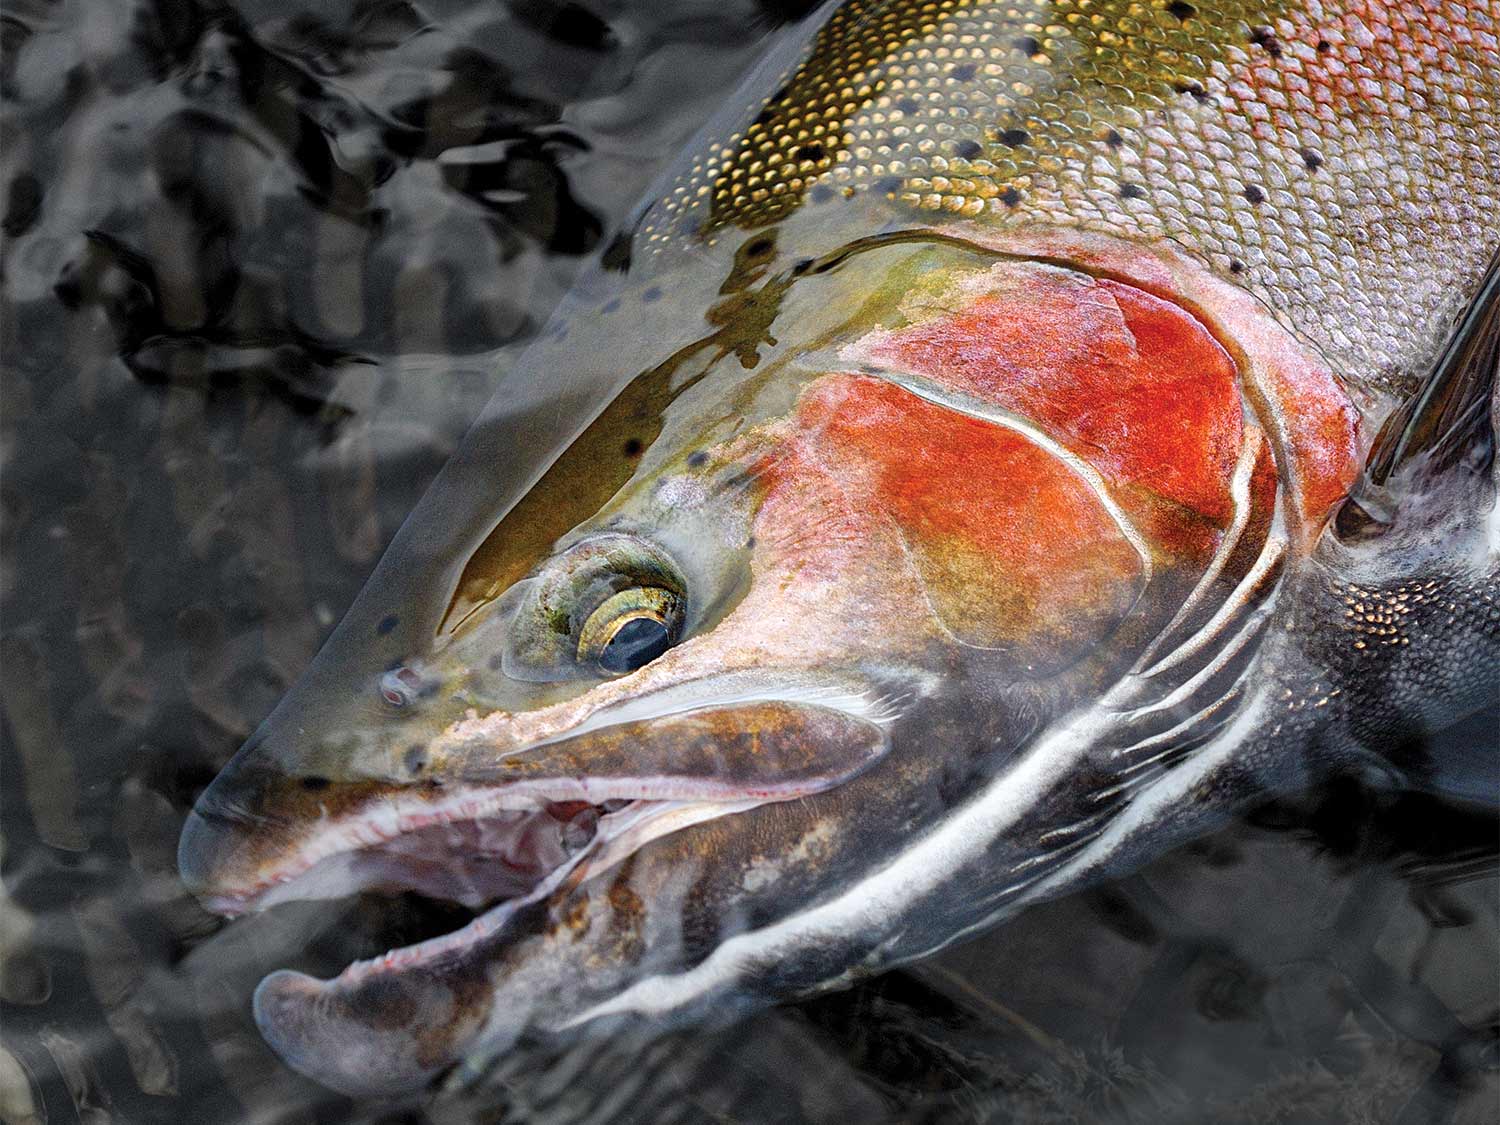 North Shore streams, and their steelhead trout, are running